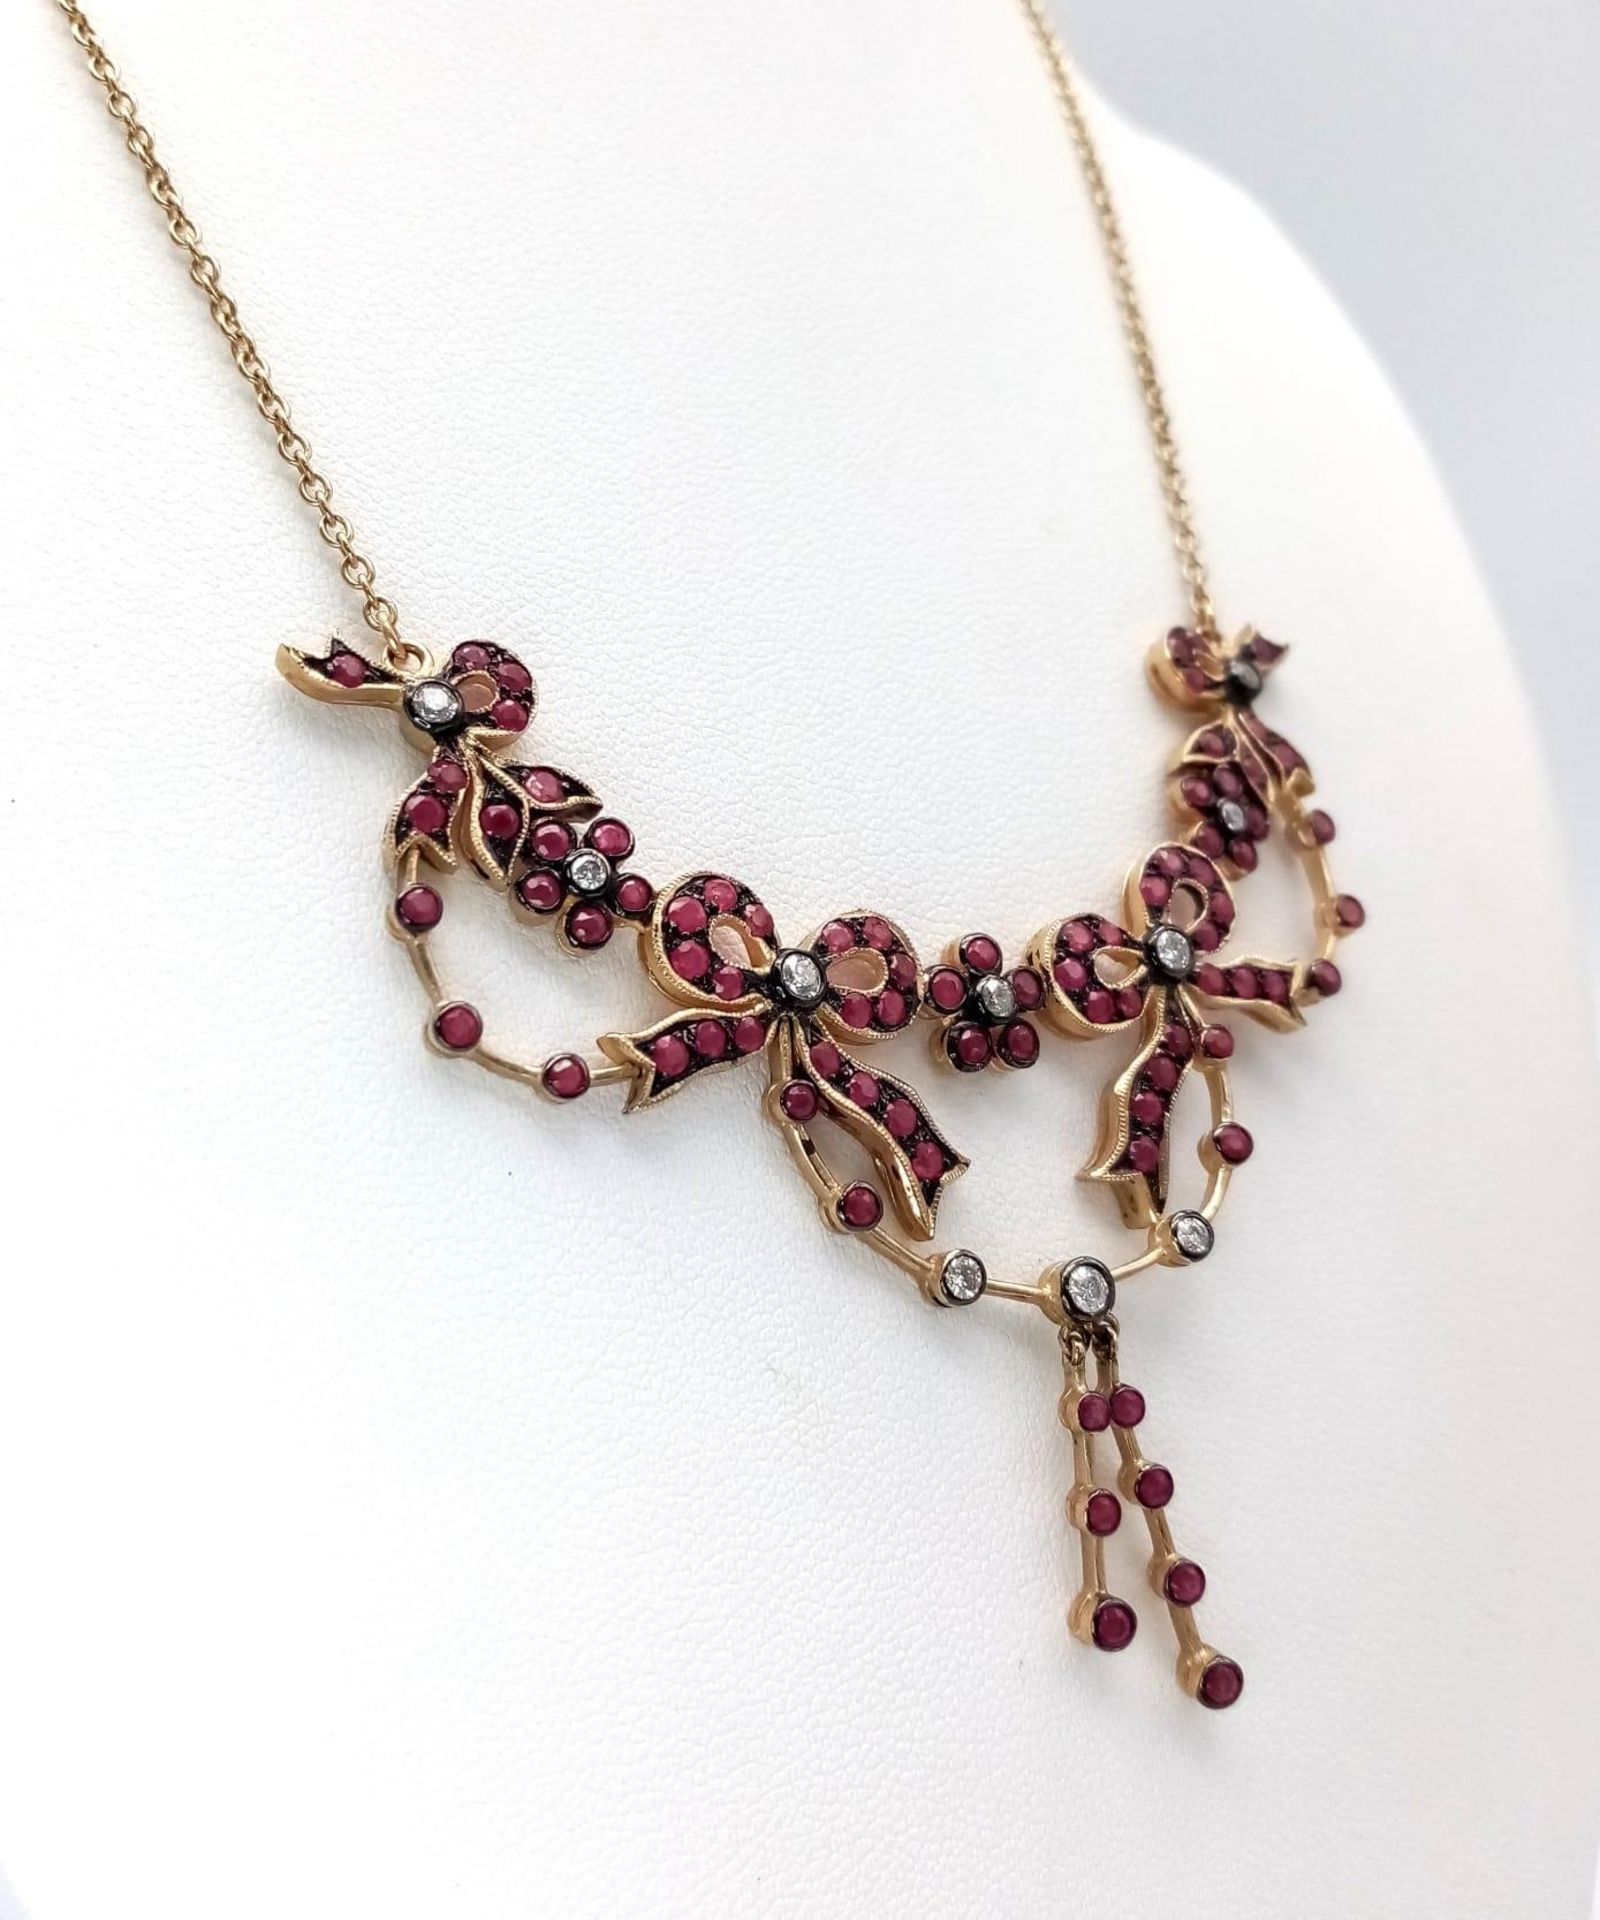 An Art Deco Style 9K Yellow Gold Ruby and Diamond Lavaliere Necklace. Floral and bow decoration. - Image 3 of 7